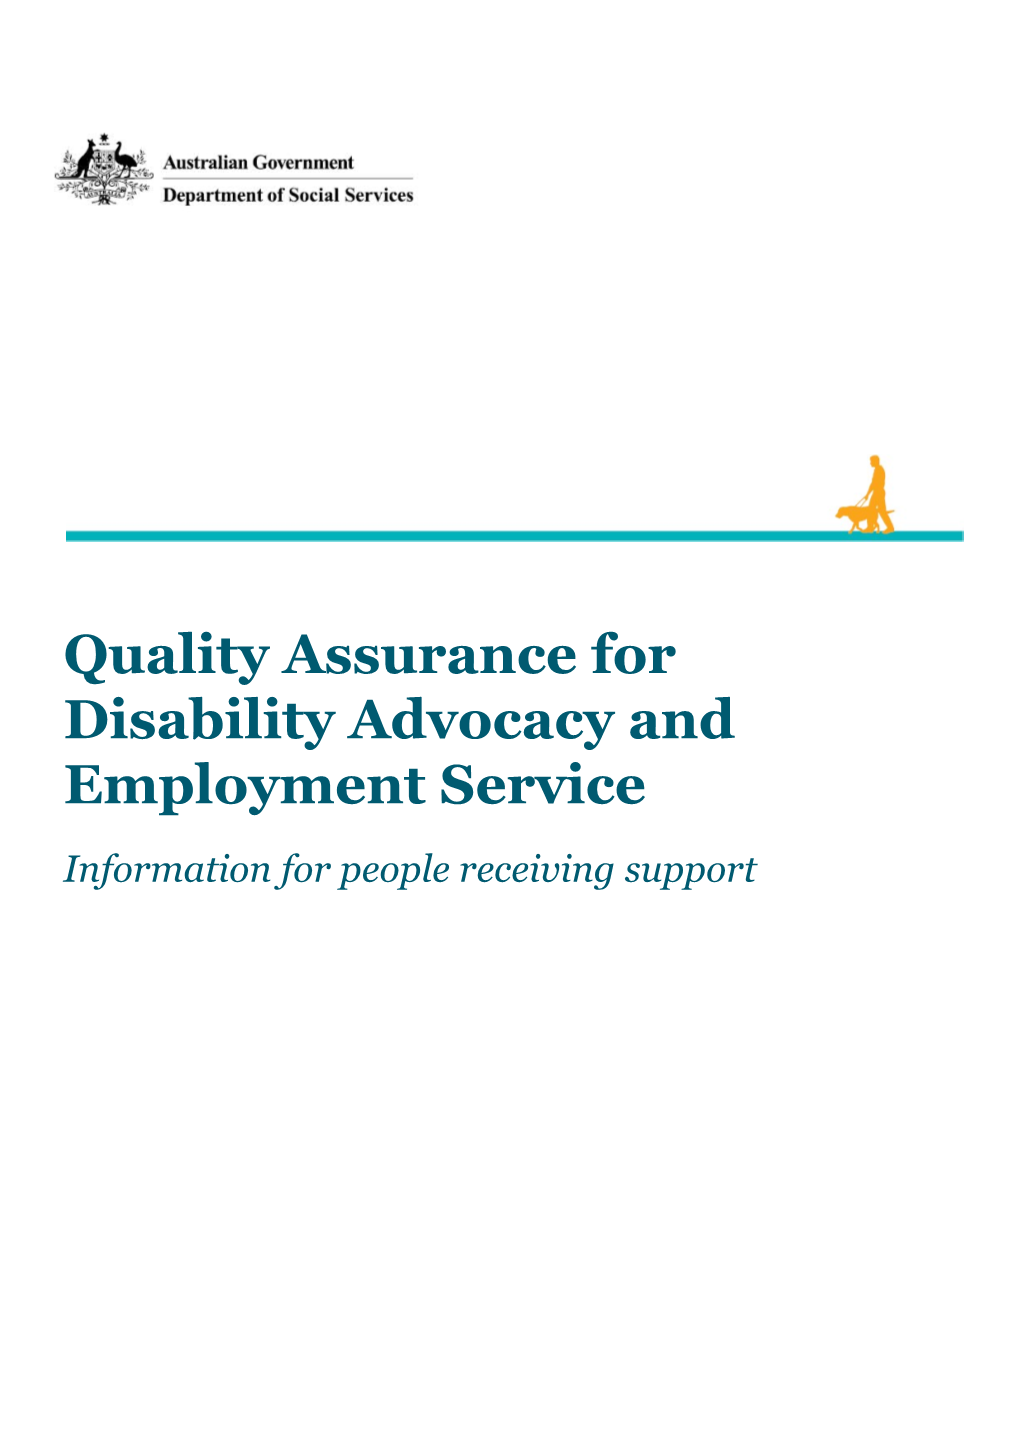 Quality Assurance for Disability Advocacy and Employment Service Providers for People With